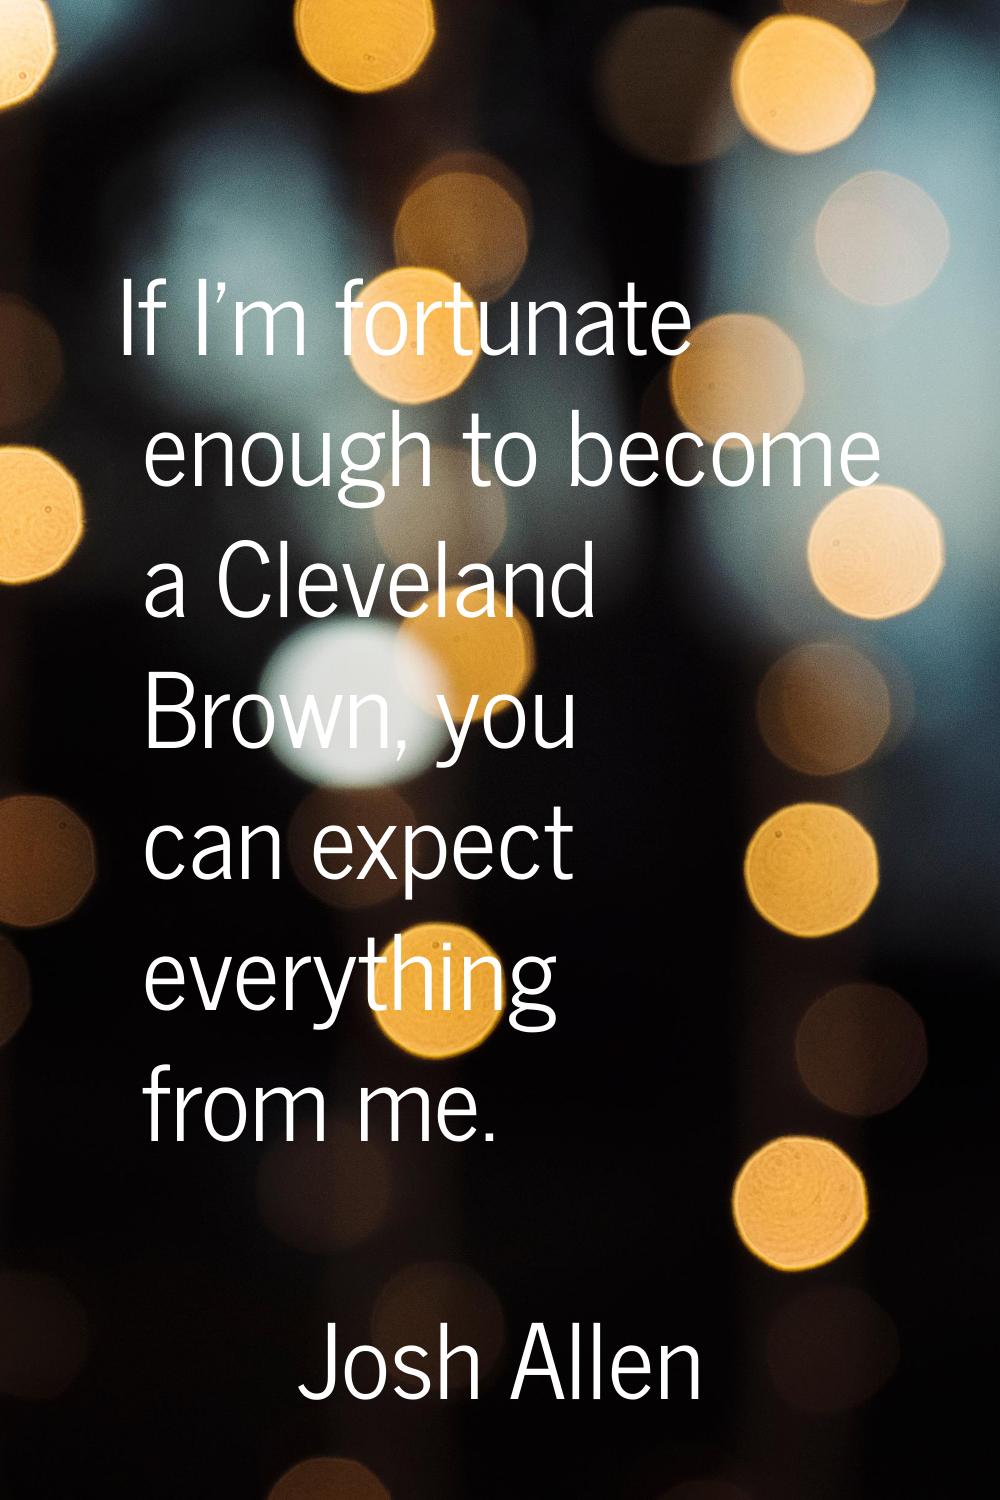 If I'm fortunate enough to become a Cleveland Brown, you can expect everything from me.